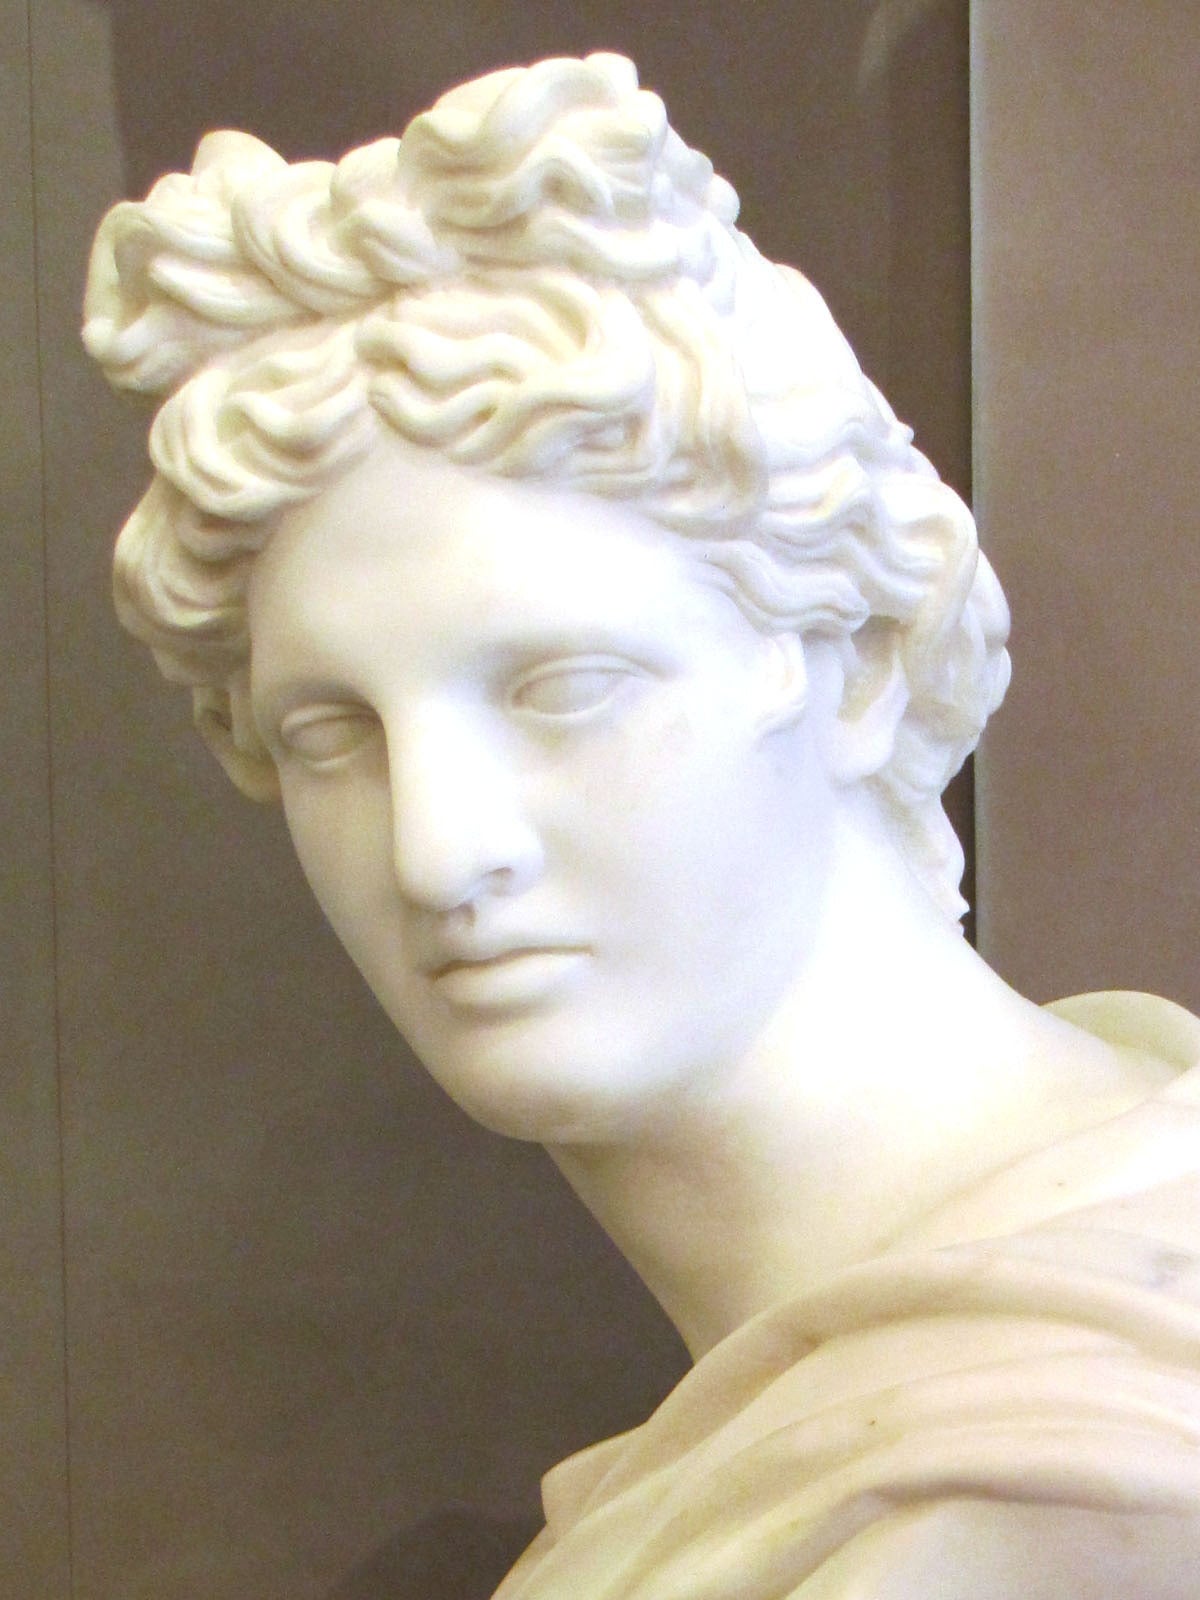 20th Century Large Beautiful Apollo Bust in Carrara Marble, after the Antique